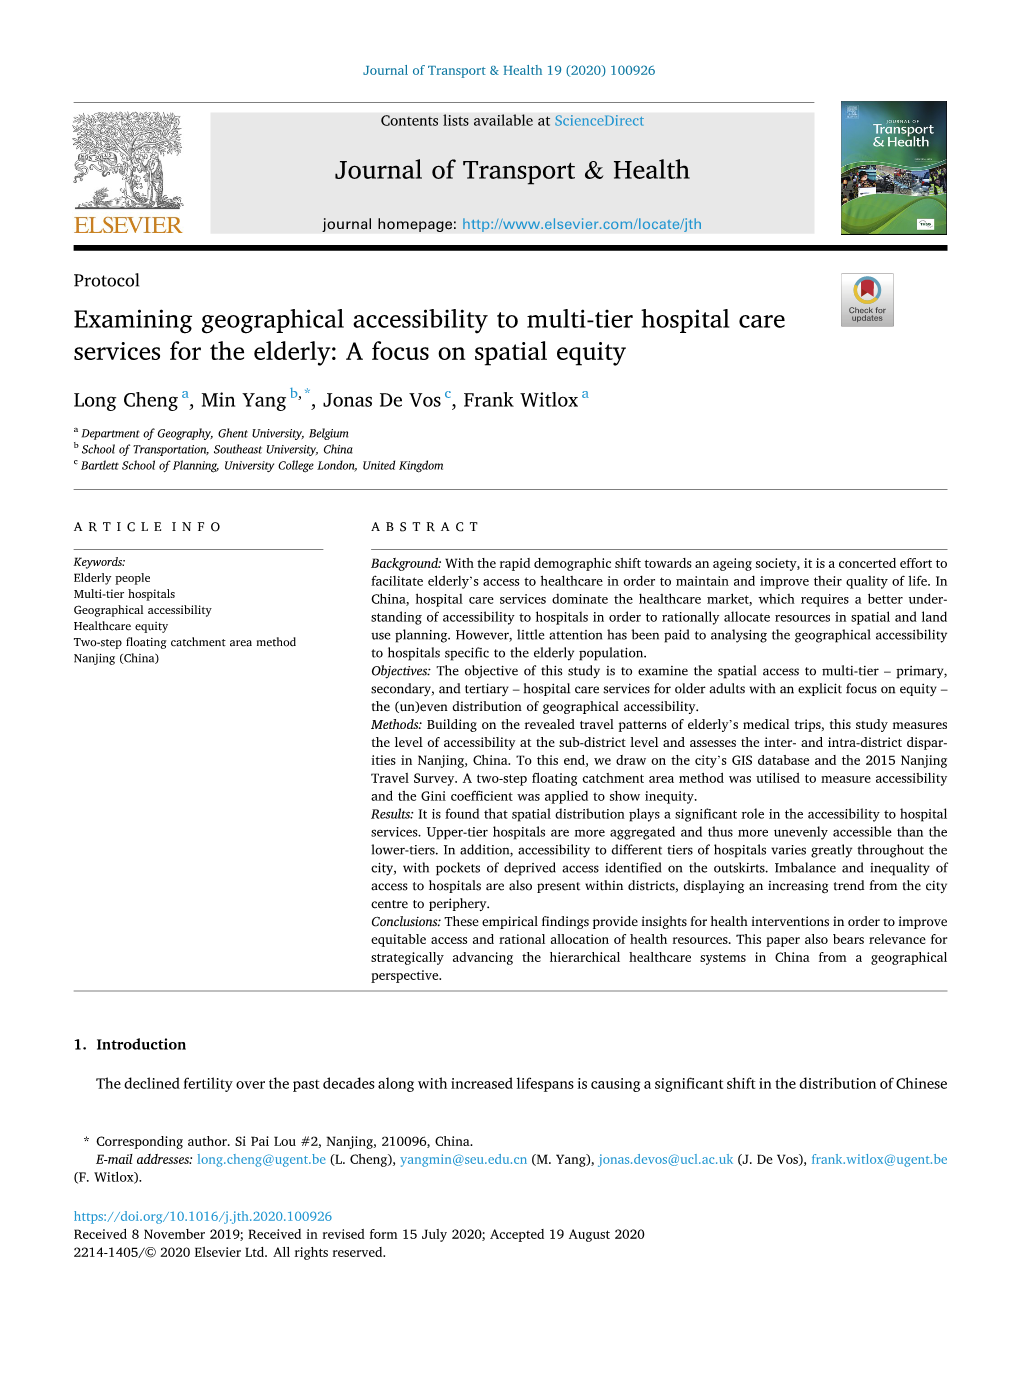 Examining Geographical Accessibility to Multi-Tier Hospital Care Services for the Elderly: a Focus on Spatial Equity